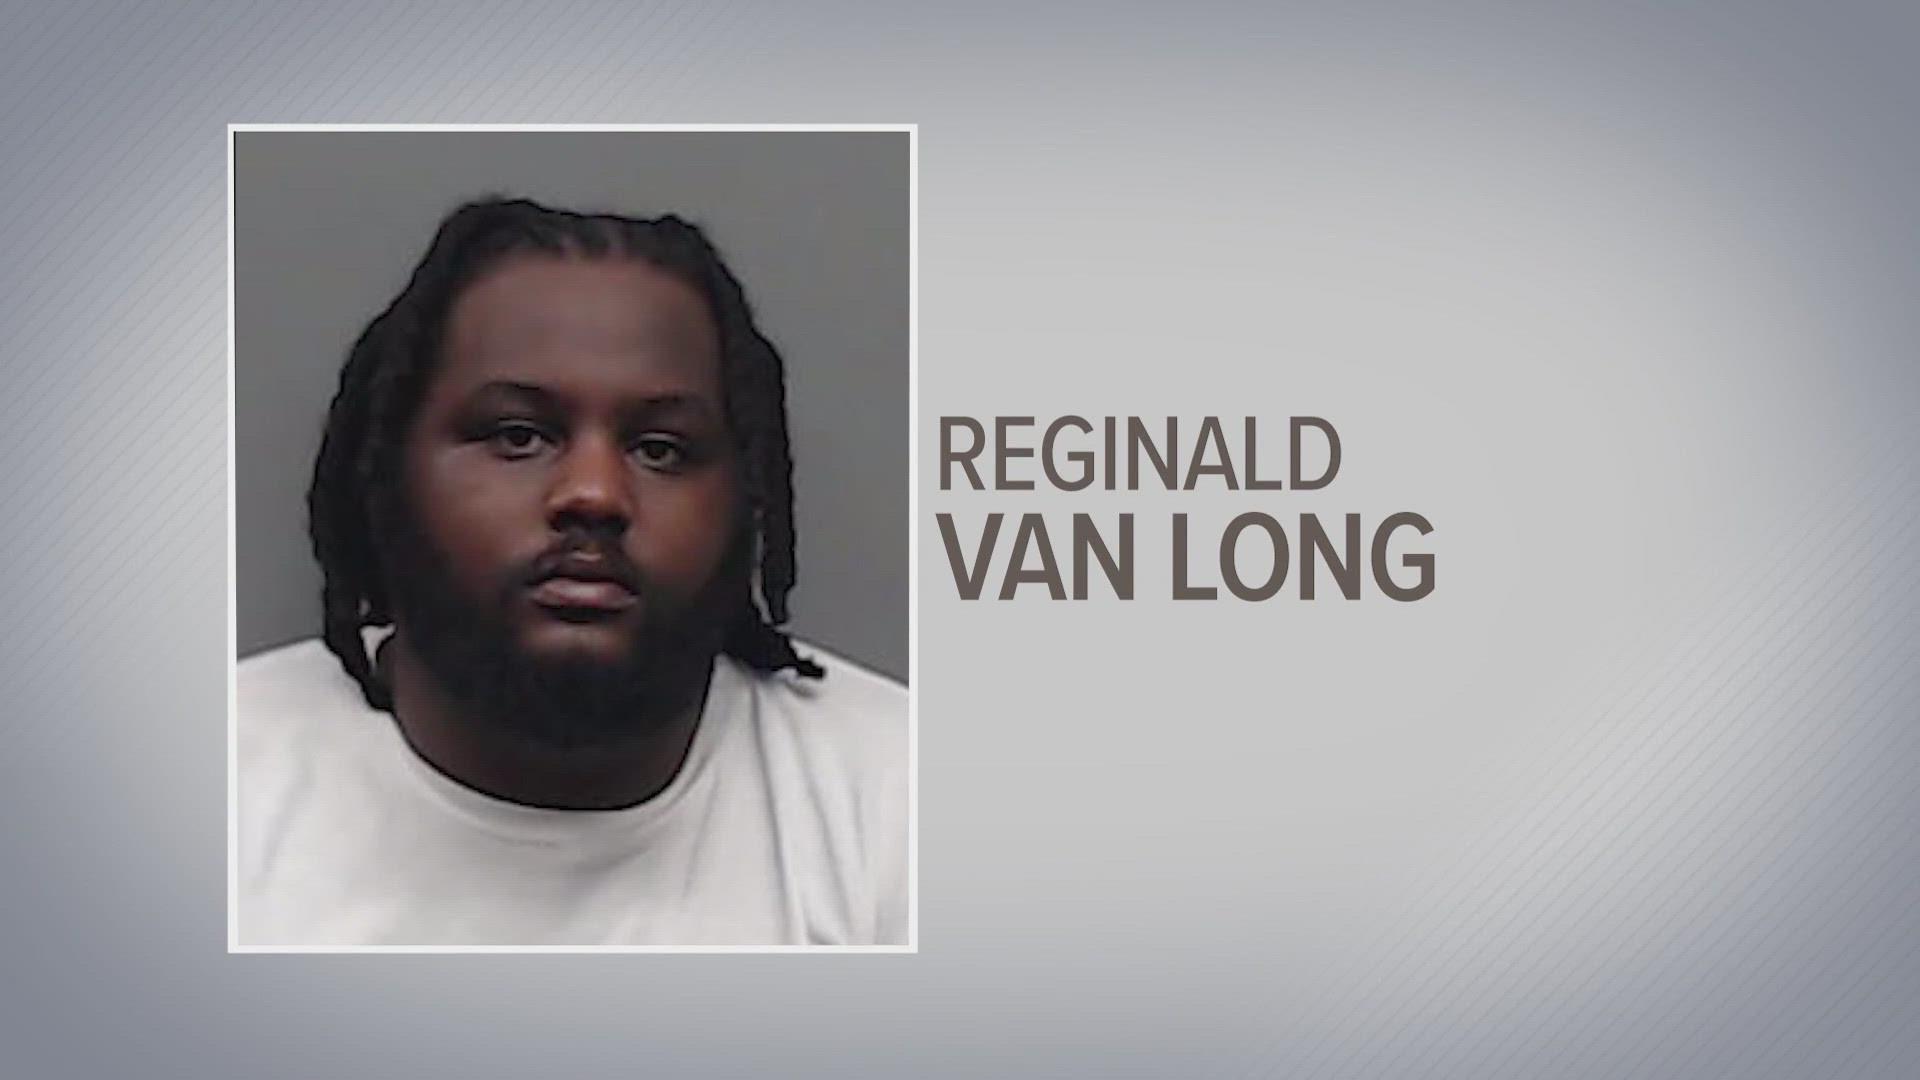 Reginald Van Long, 27, is facing multiple counts of sexual assault of a child under 17, improper relationship with a student and online solicitation of a minor.